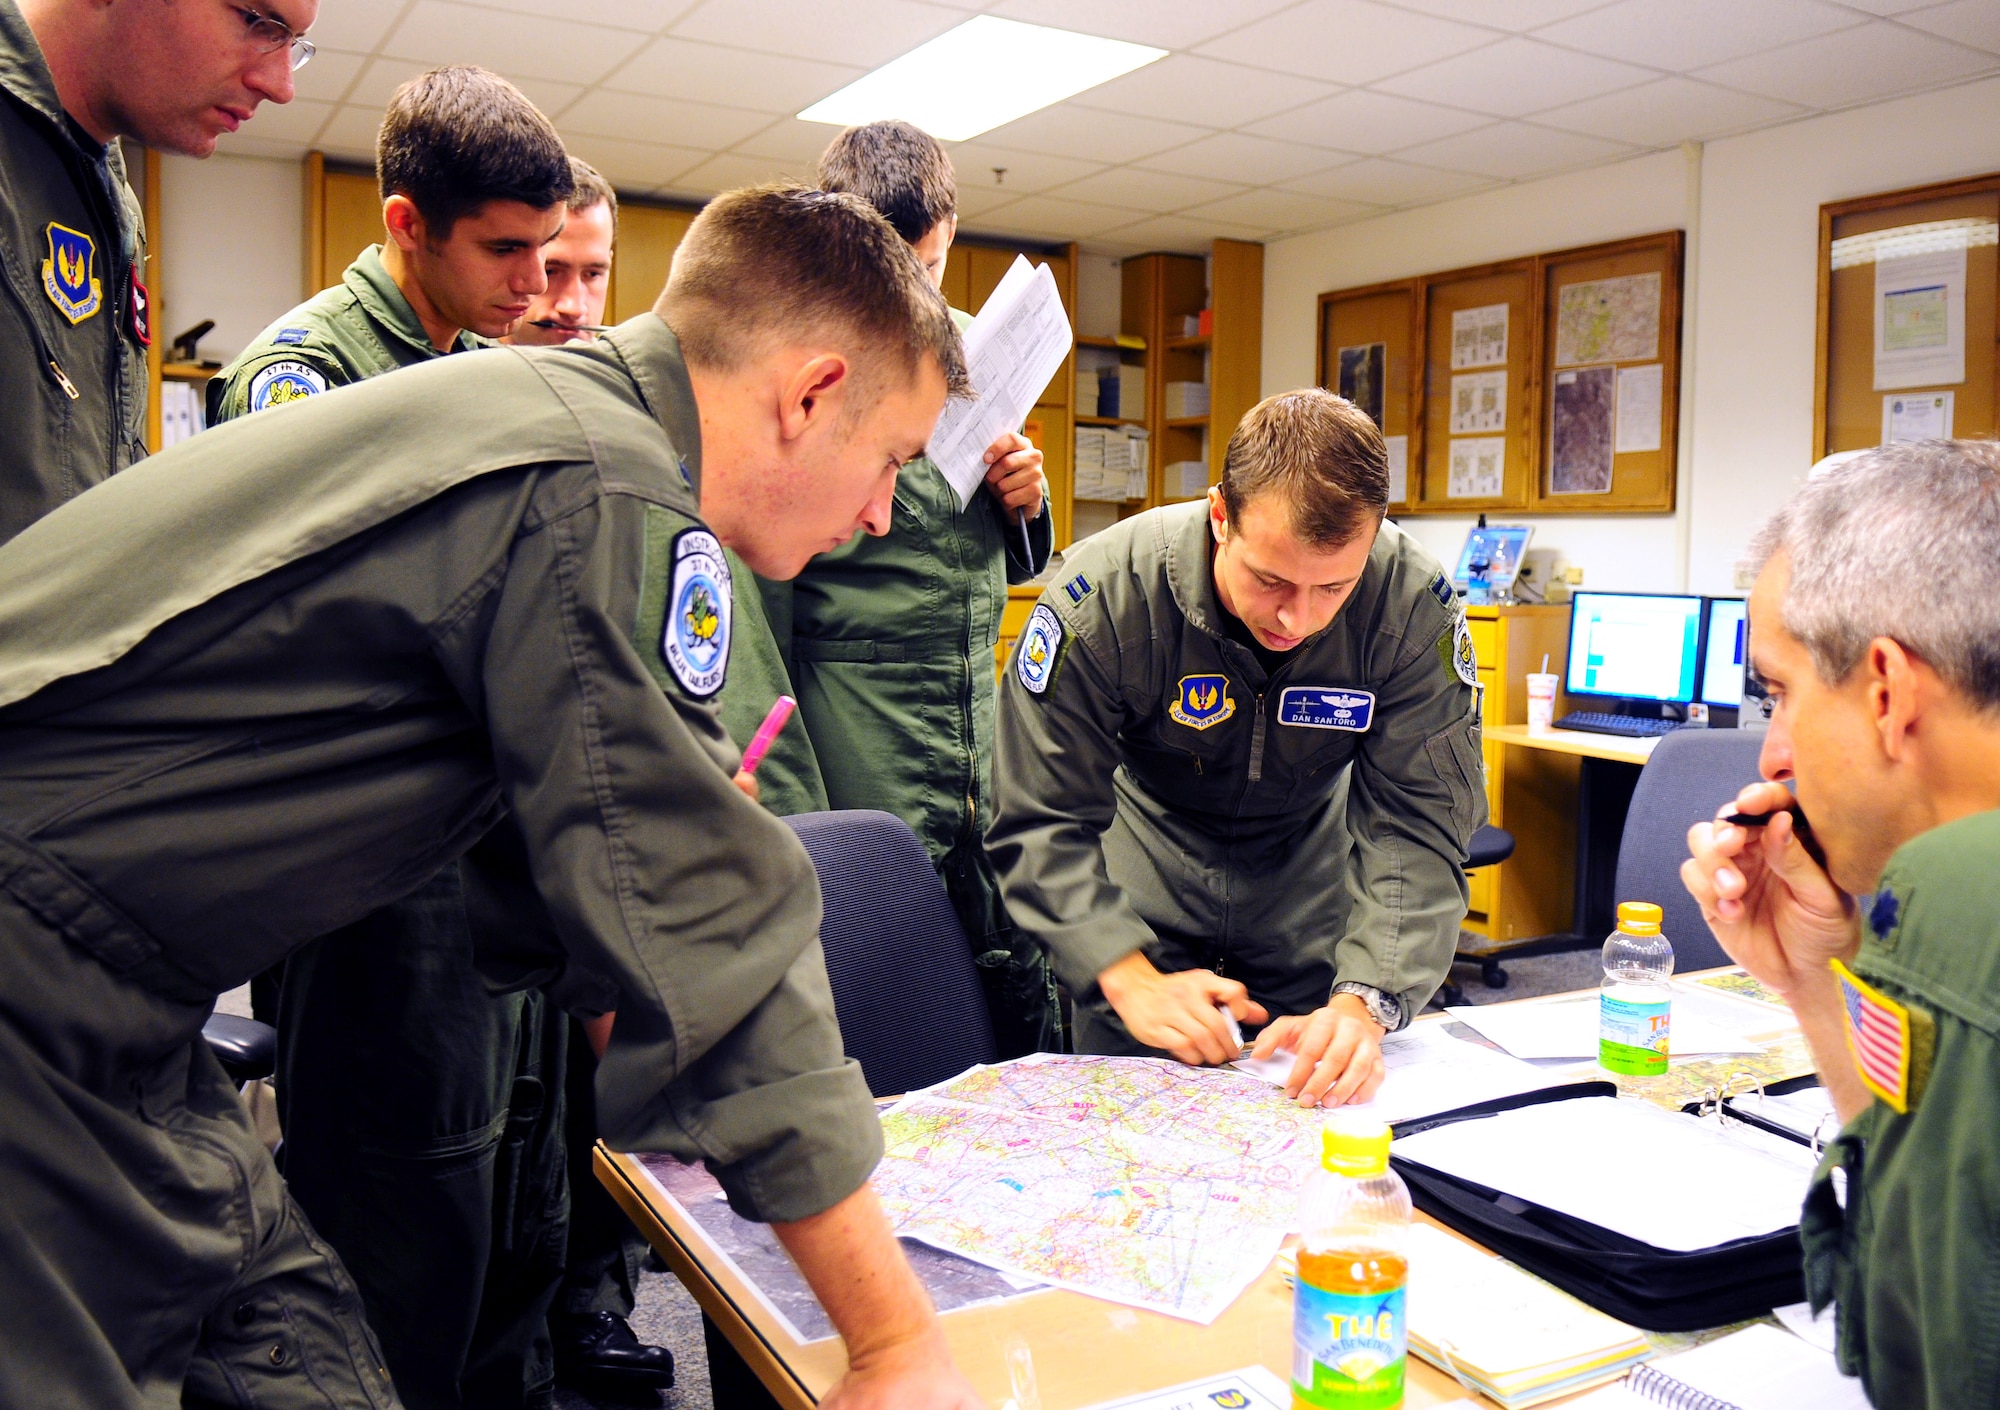 U.S. Air Force Capt Dan Santoro, a C-130 pilot with the 37th Airlift Squadron, goes over a map during the preflight briefing with other pilots that are scheduled to fly a local mission involving two C-130J models and one C-130E model from Ramstein AB, Germany on Sept 23, 2009. (U.S. Air Force photo by Staff Sgt. Jocelyn Rich)